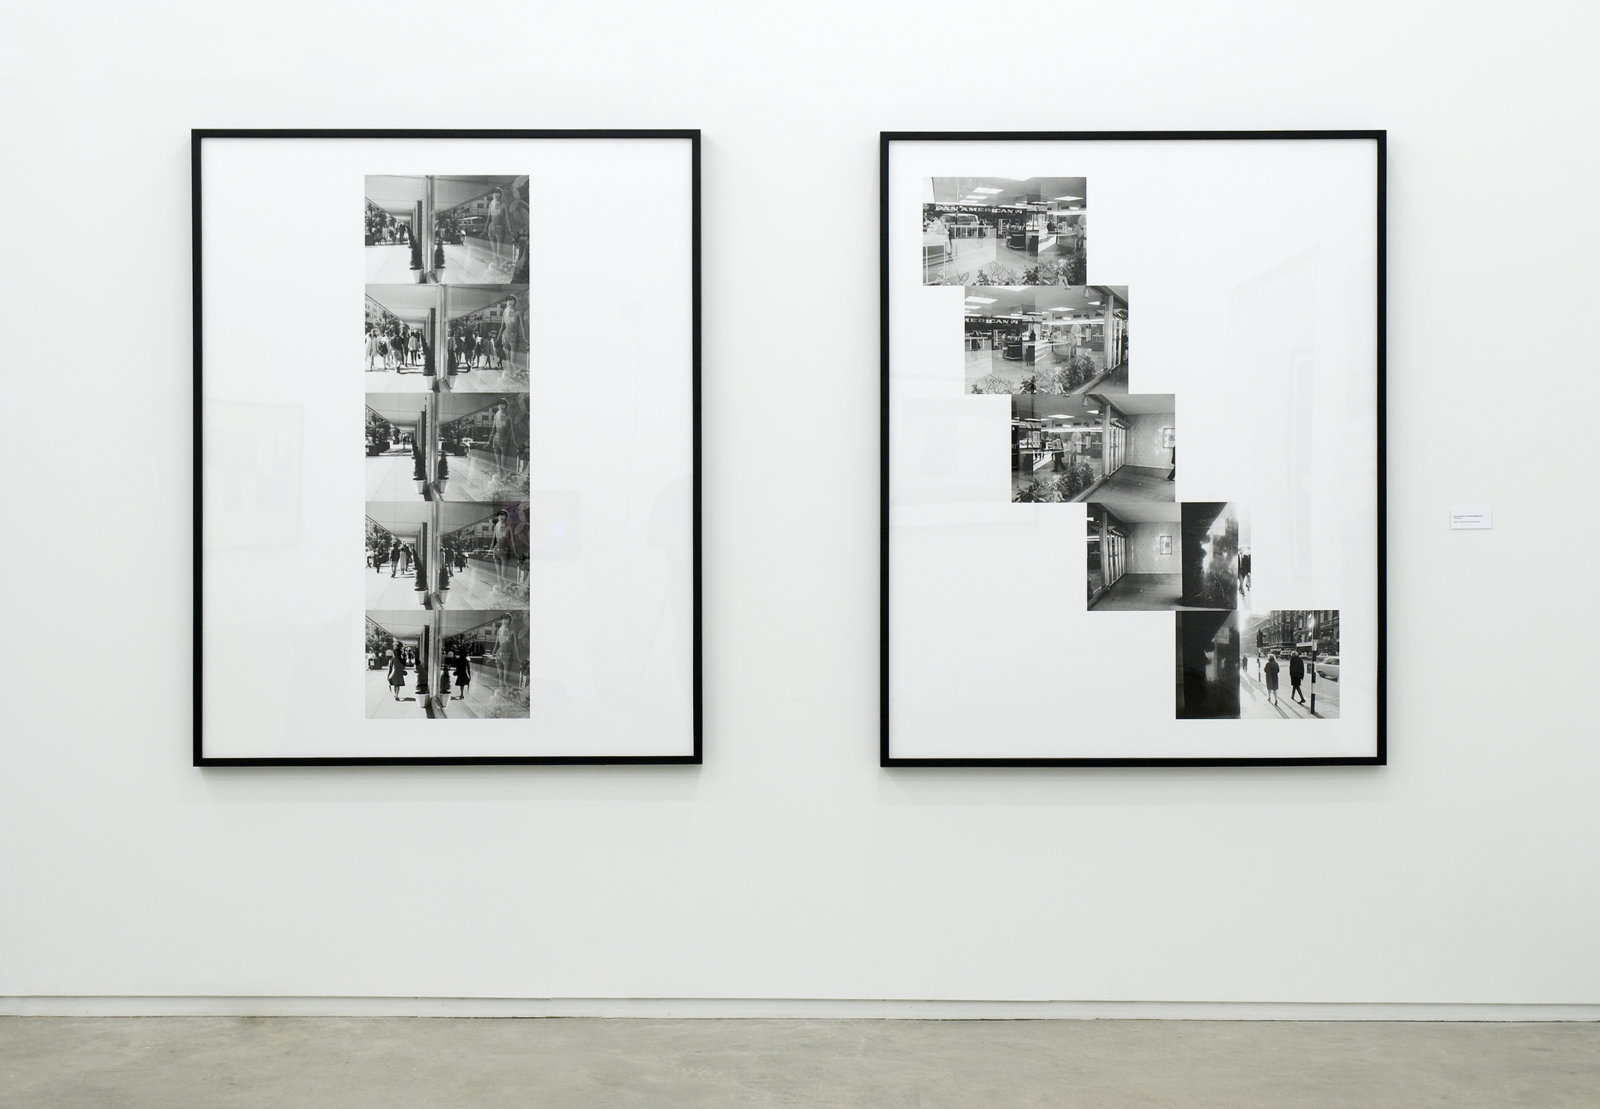 Ian Wallace, Street Reflections and Pan Am Scan, 1970–2009, 2 black and white photo inkets, each 61 x 48 in. (154 x 121 cm)